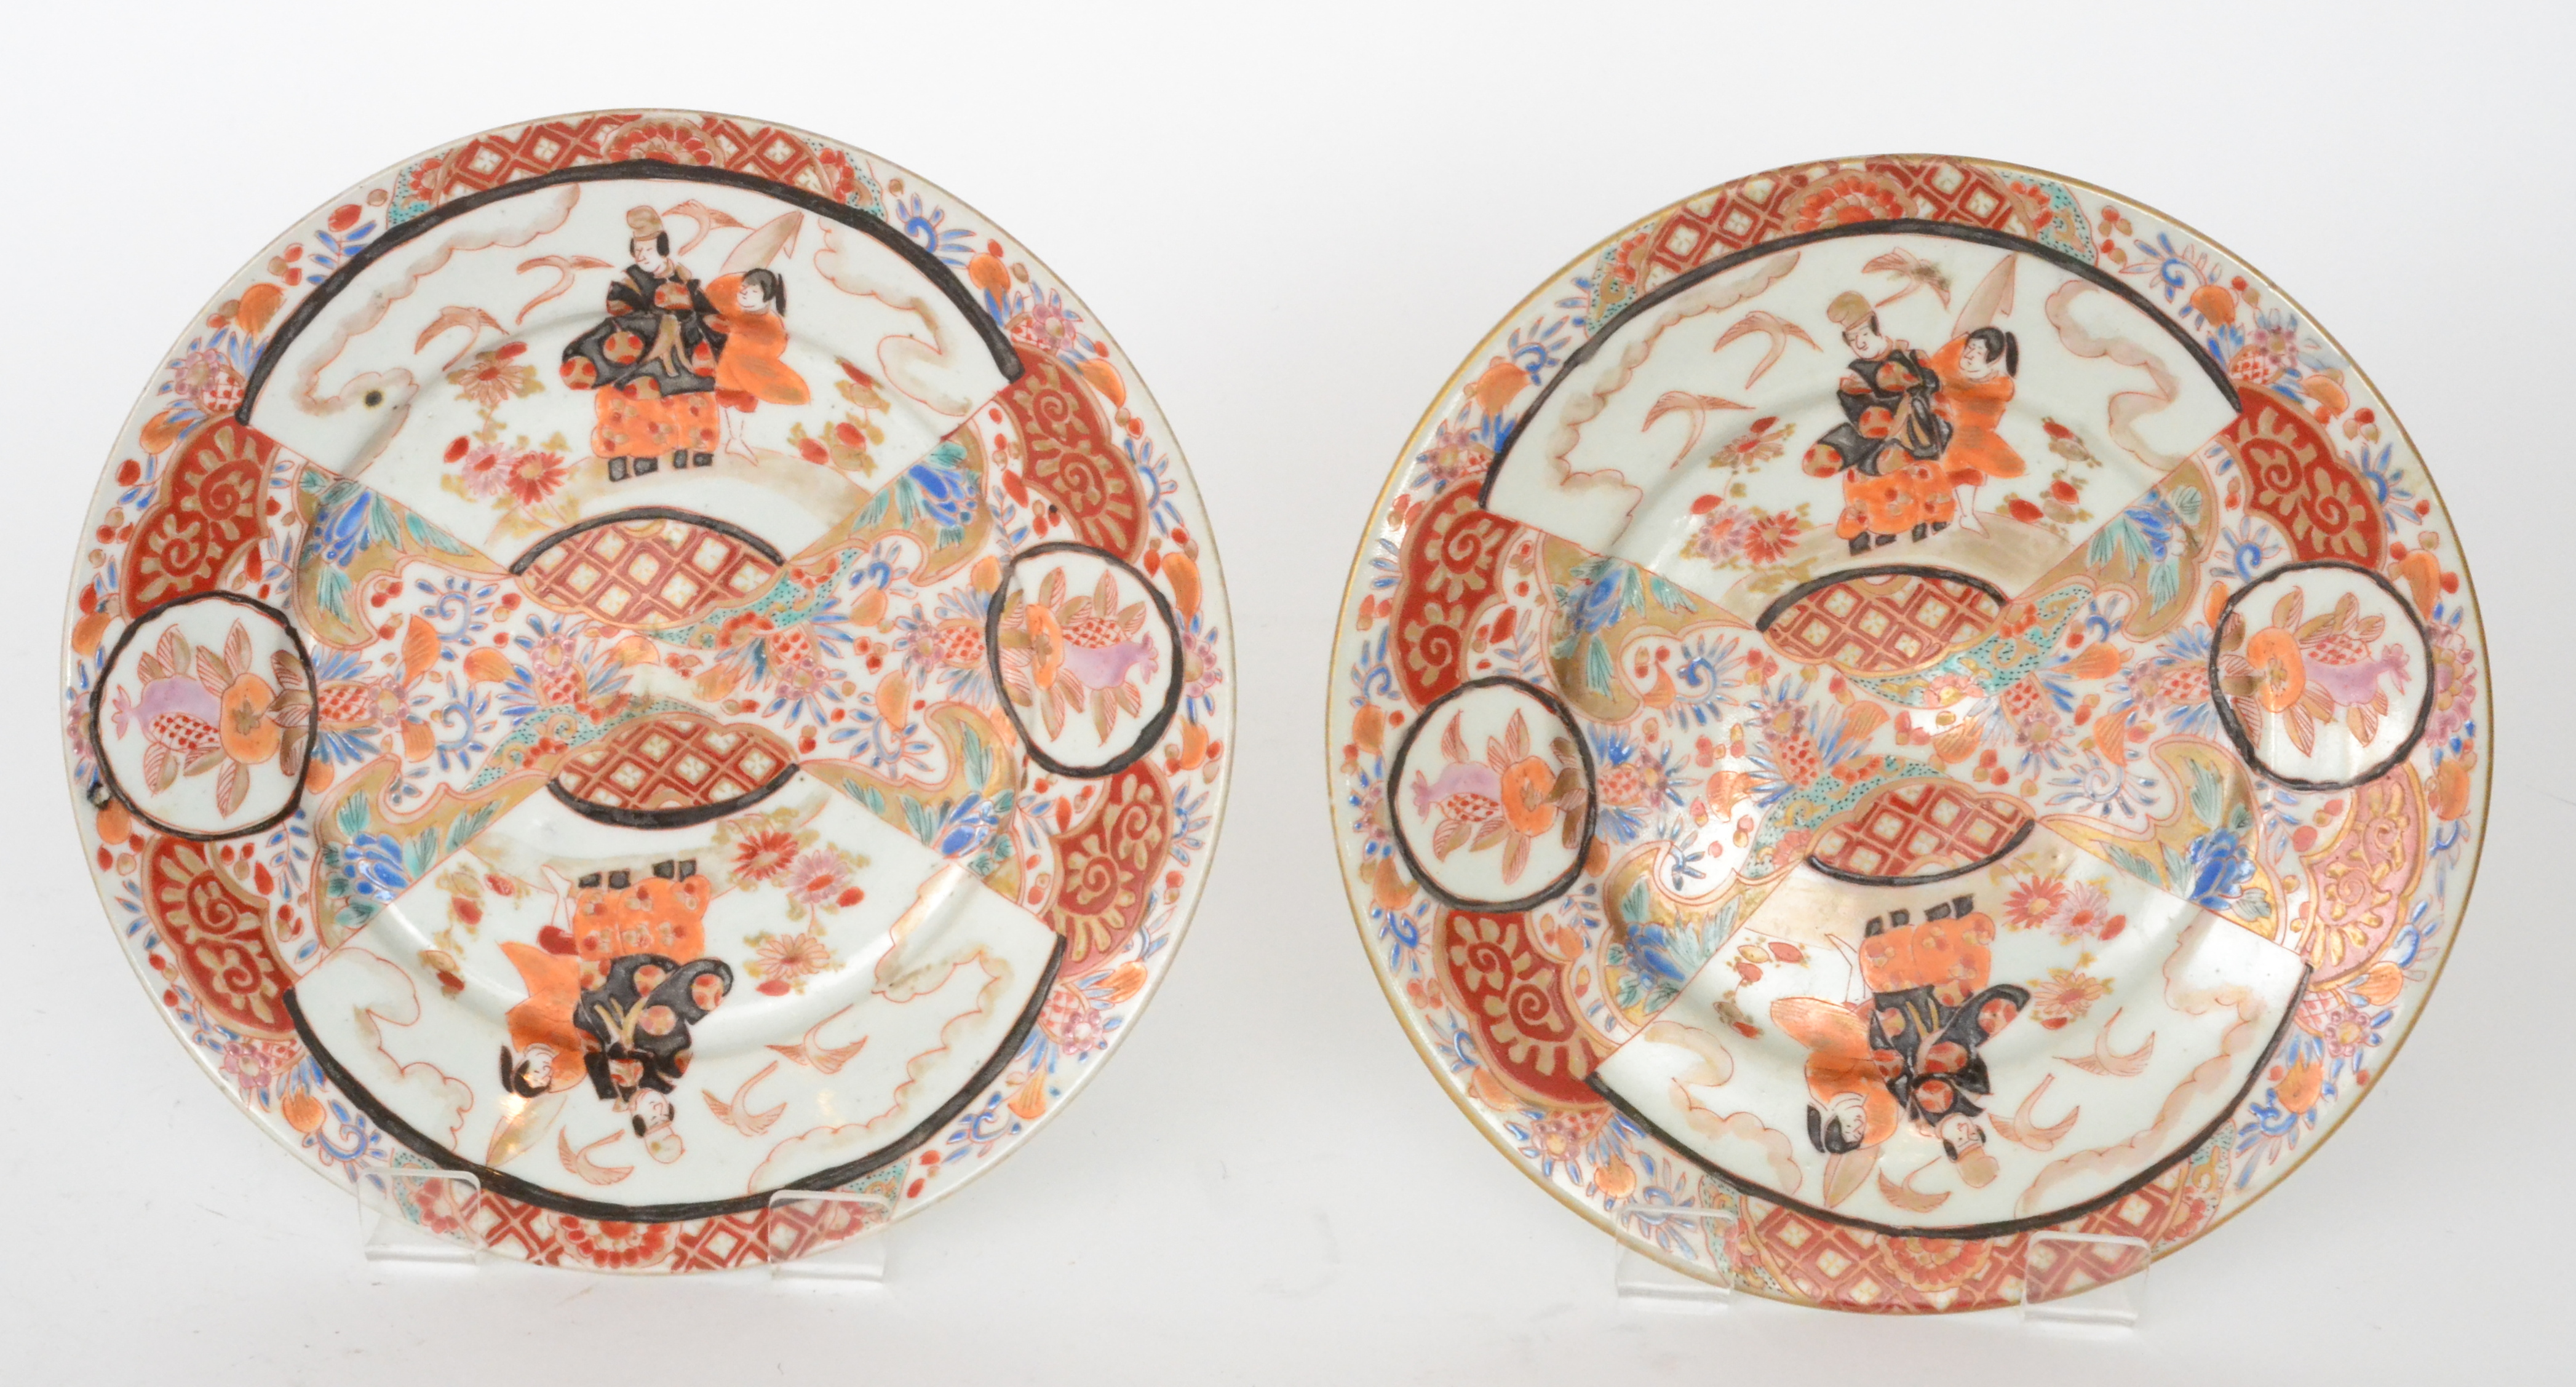 A pair of Chinese shallow plates each decorated with fan shaped cartouche panels of figures